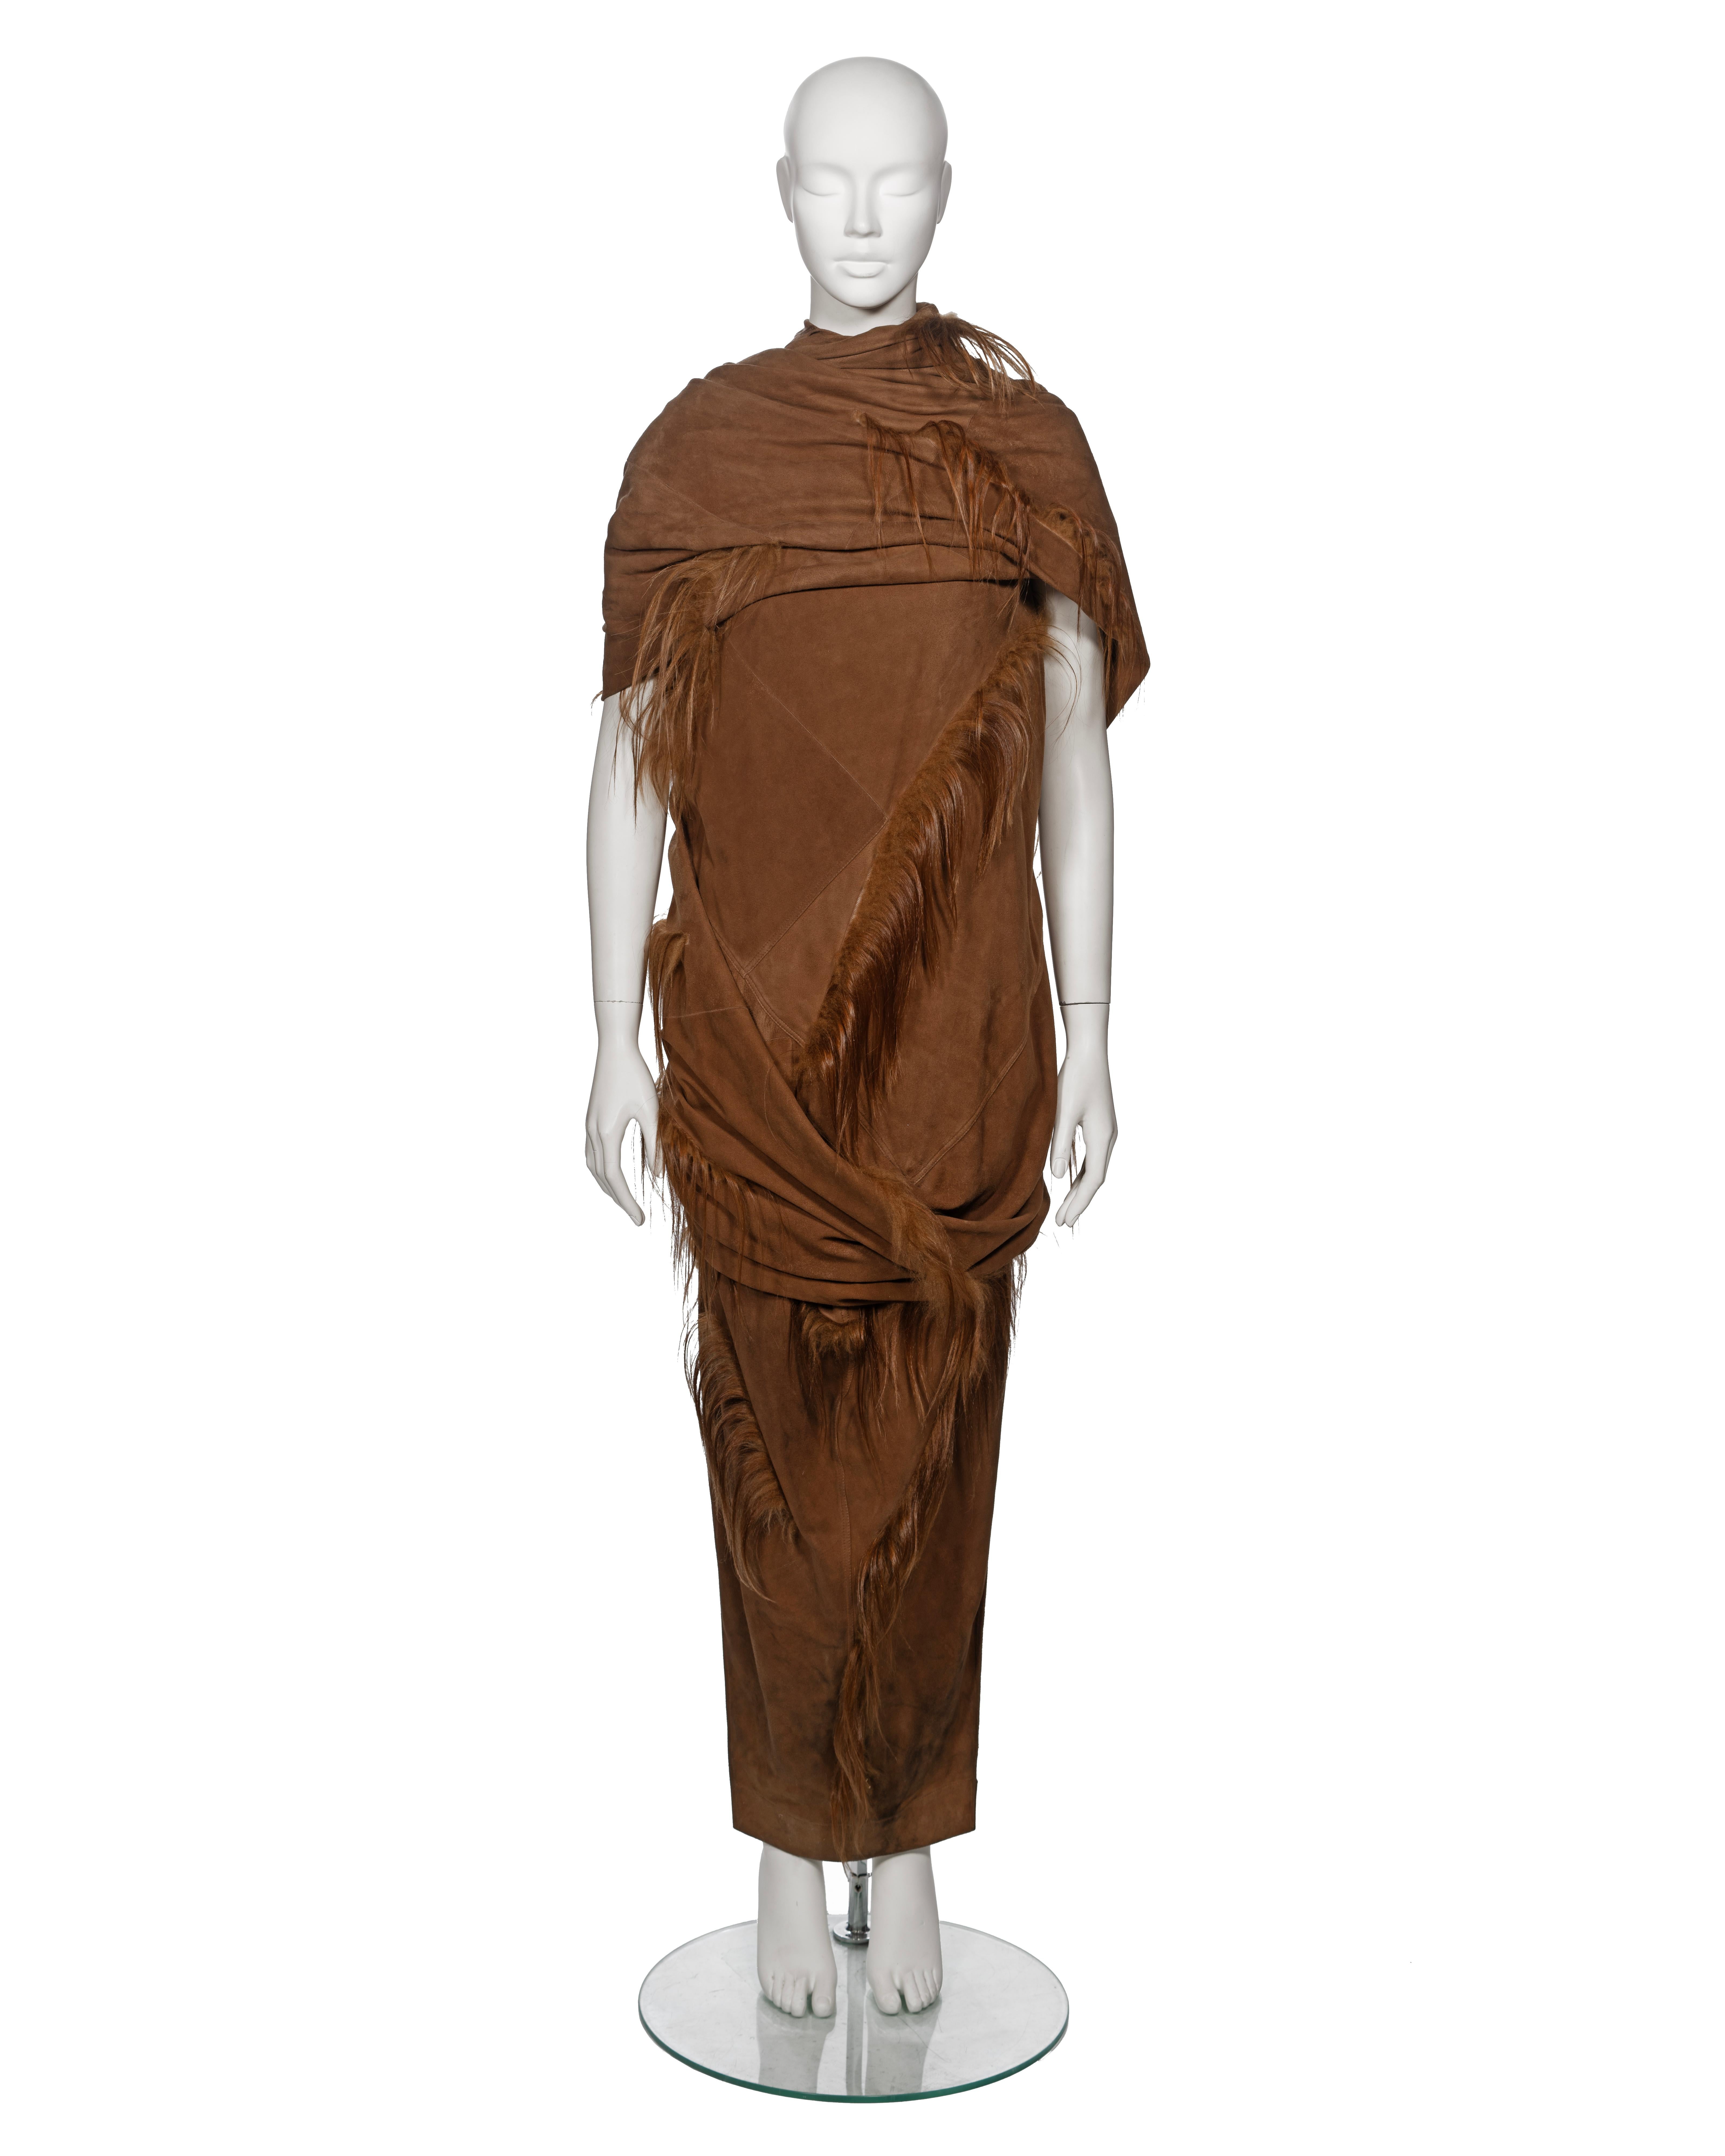 ▪ Archival Rick Owens 'Sphinx' Runway Ensemble 
▪ Fall-Winter 2015
▪ Crafted from multiple panels of chestnut suede
▪ Embellished with goat hair trimmings
▪ Asymmetric draped top boasts a high neck and expansive over-the-shoulder drape
▪ Accompanied